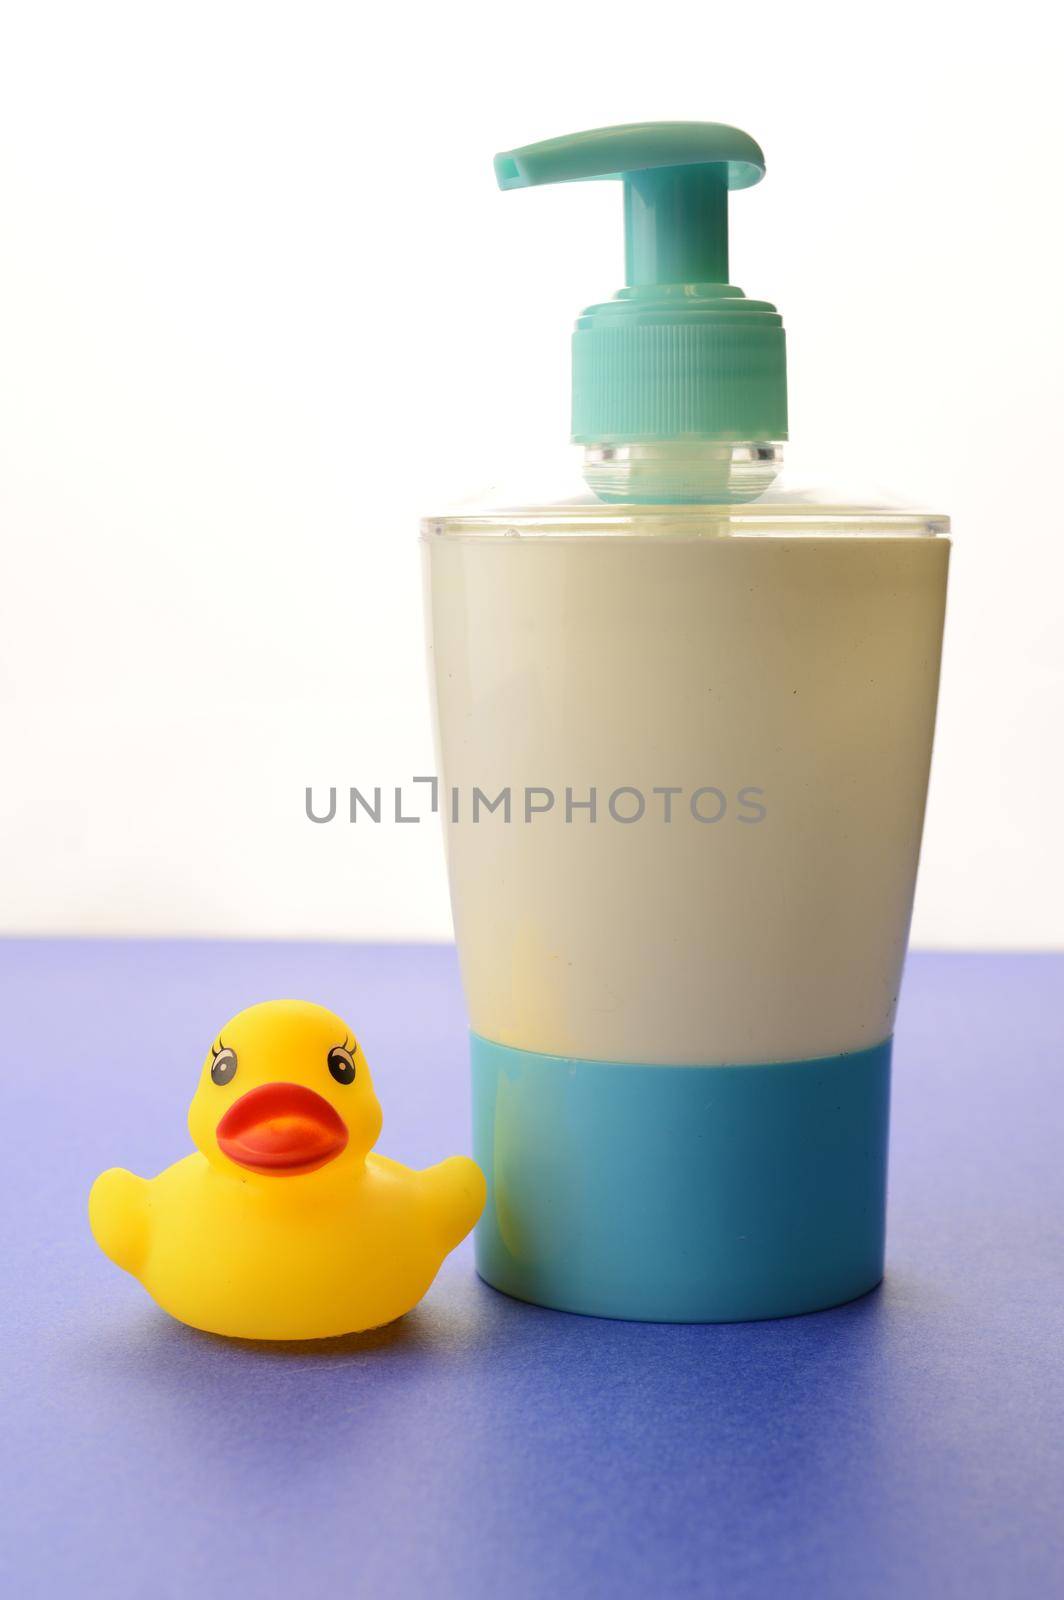 A liquid soap dispenser and rubber duck over a blue and white background remind us to wash our hands.